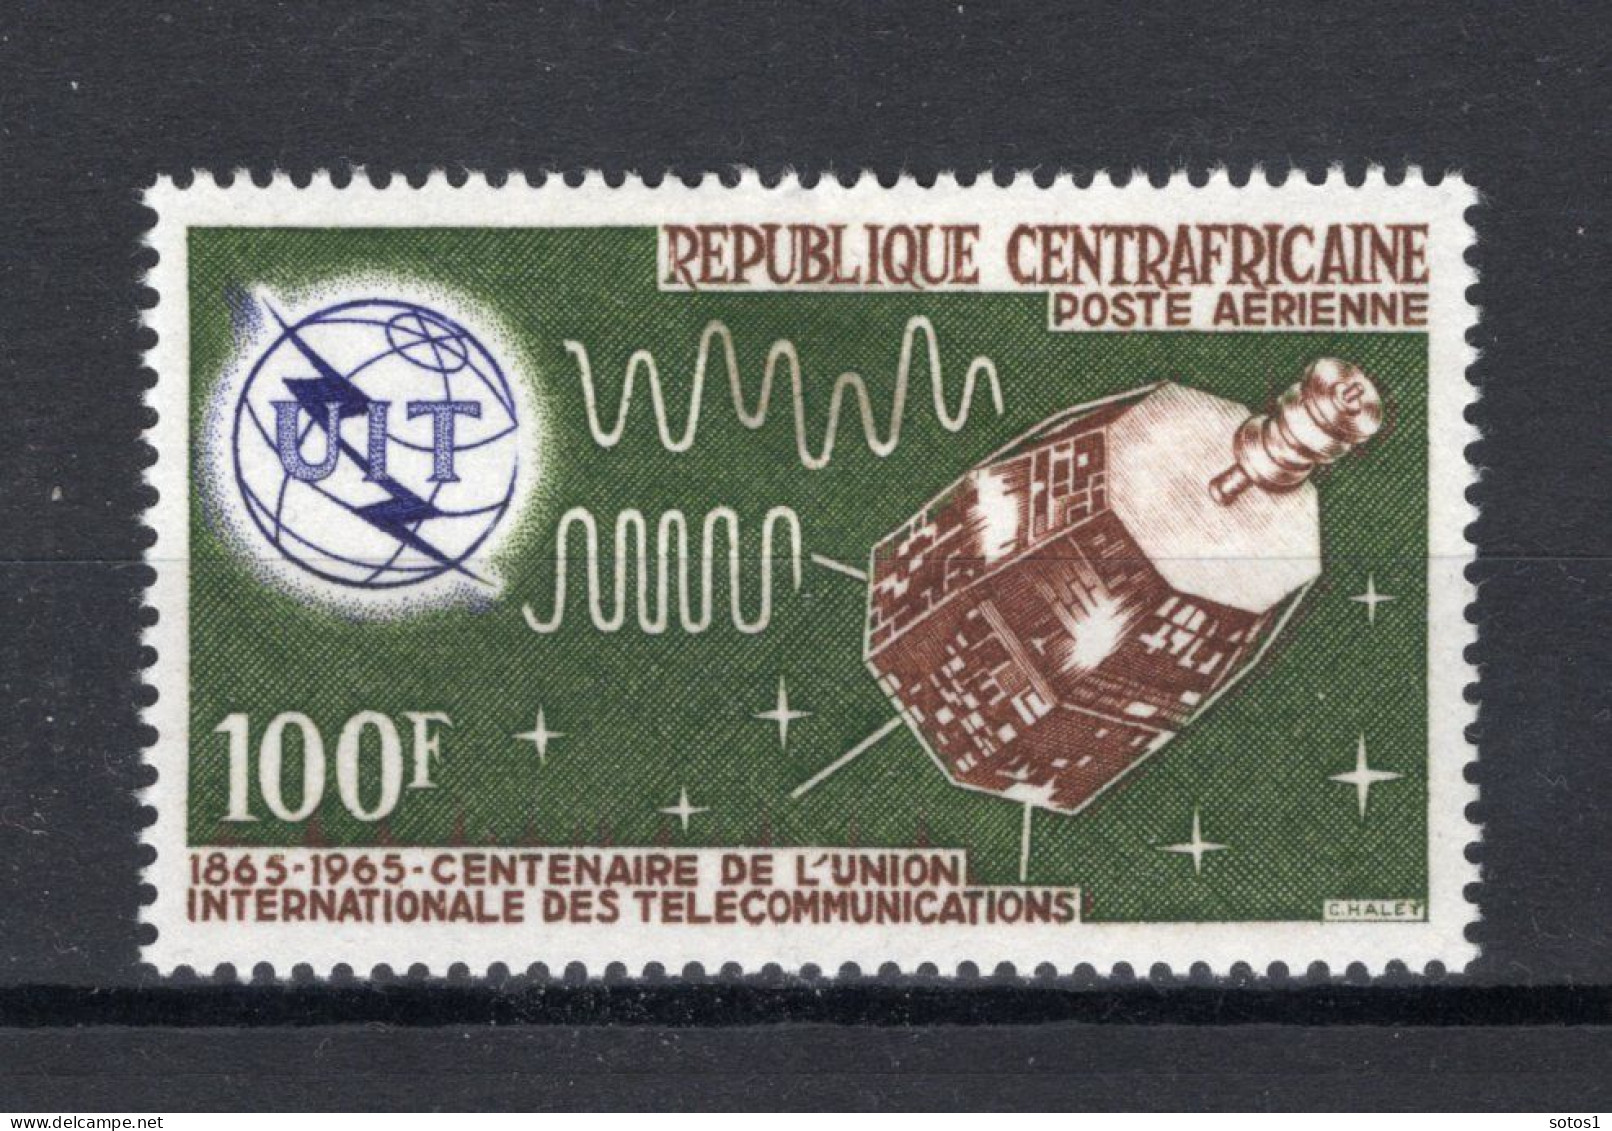 CENTRAFRICAINE Yt. PA32 MH Luchtpost 1965 - Central African Republic